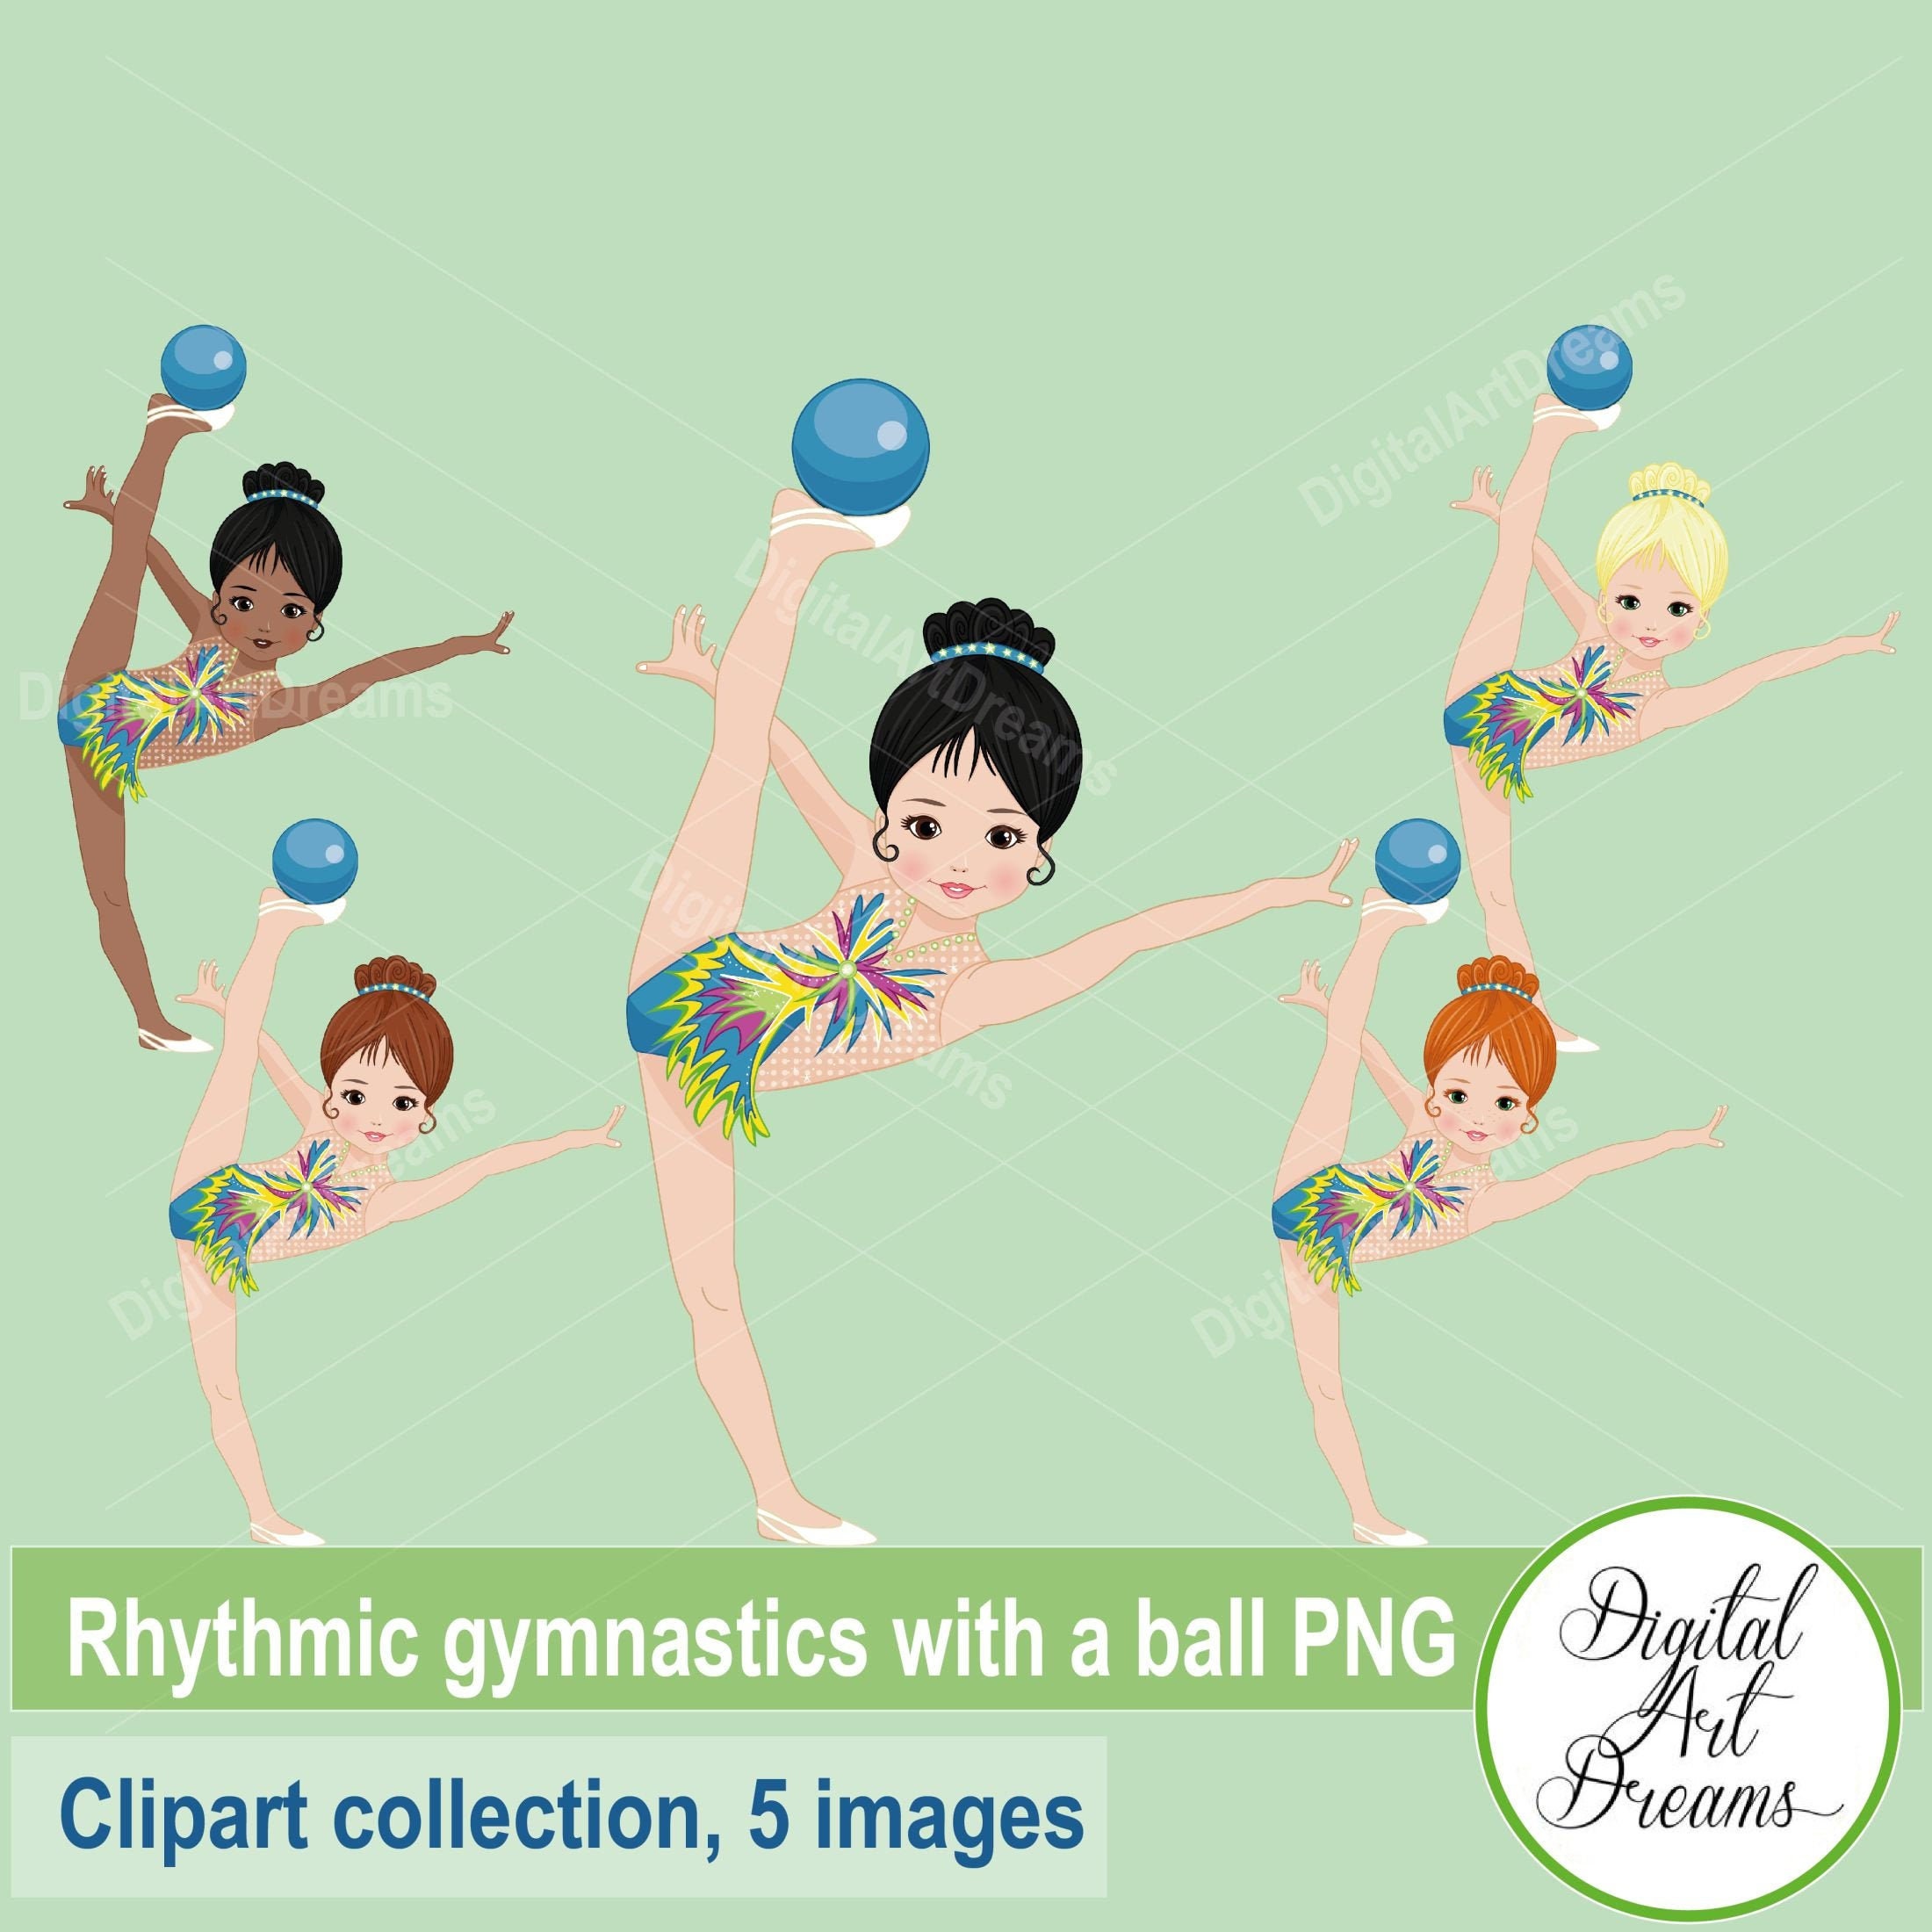 Gymnastics Clip Art, Rhythmic Gymnastics With Balls, Little Girls Graphics,  African American Girl, Cute Characters, Wall Art Printables Png -   Sweden